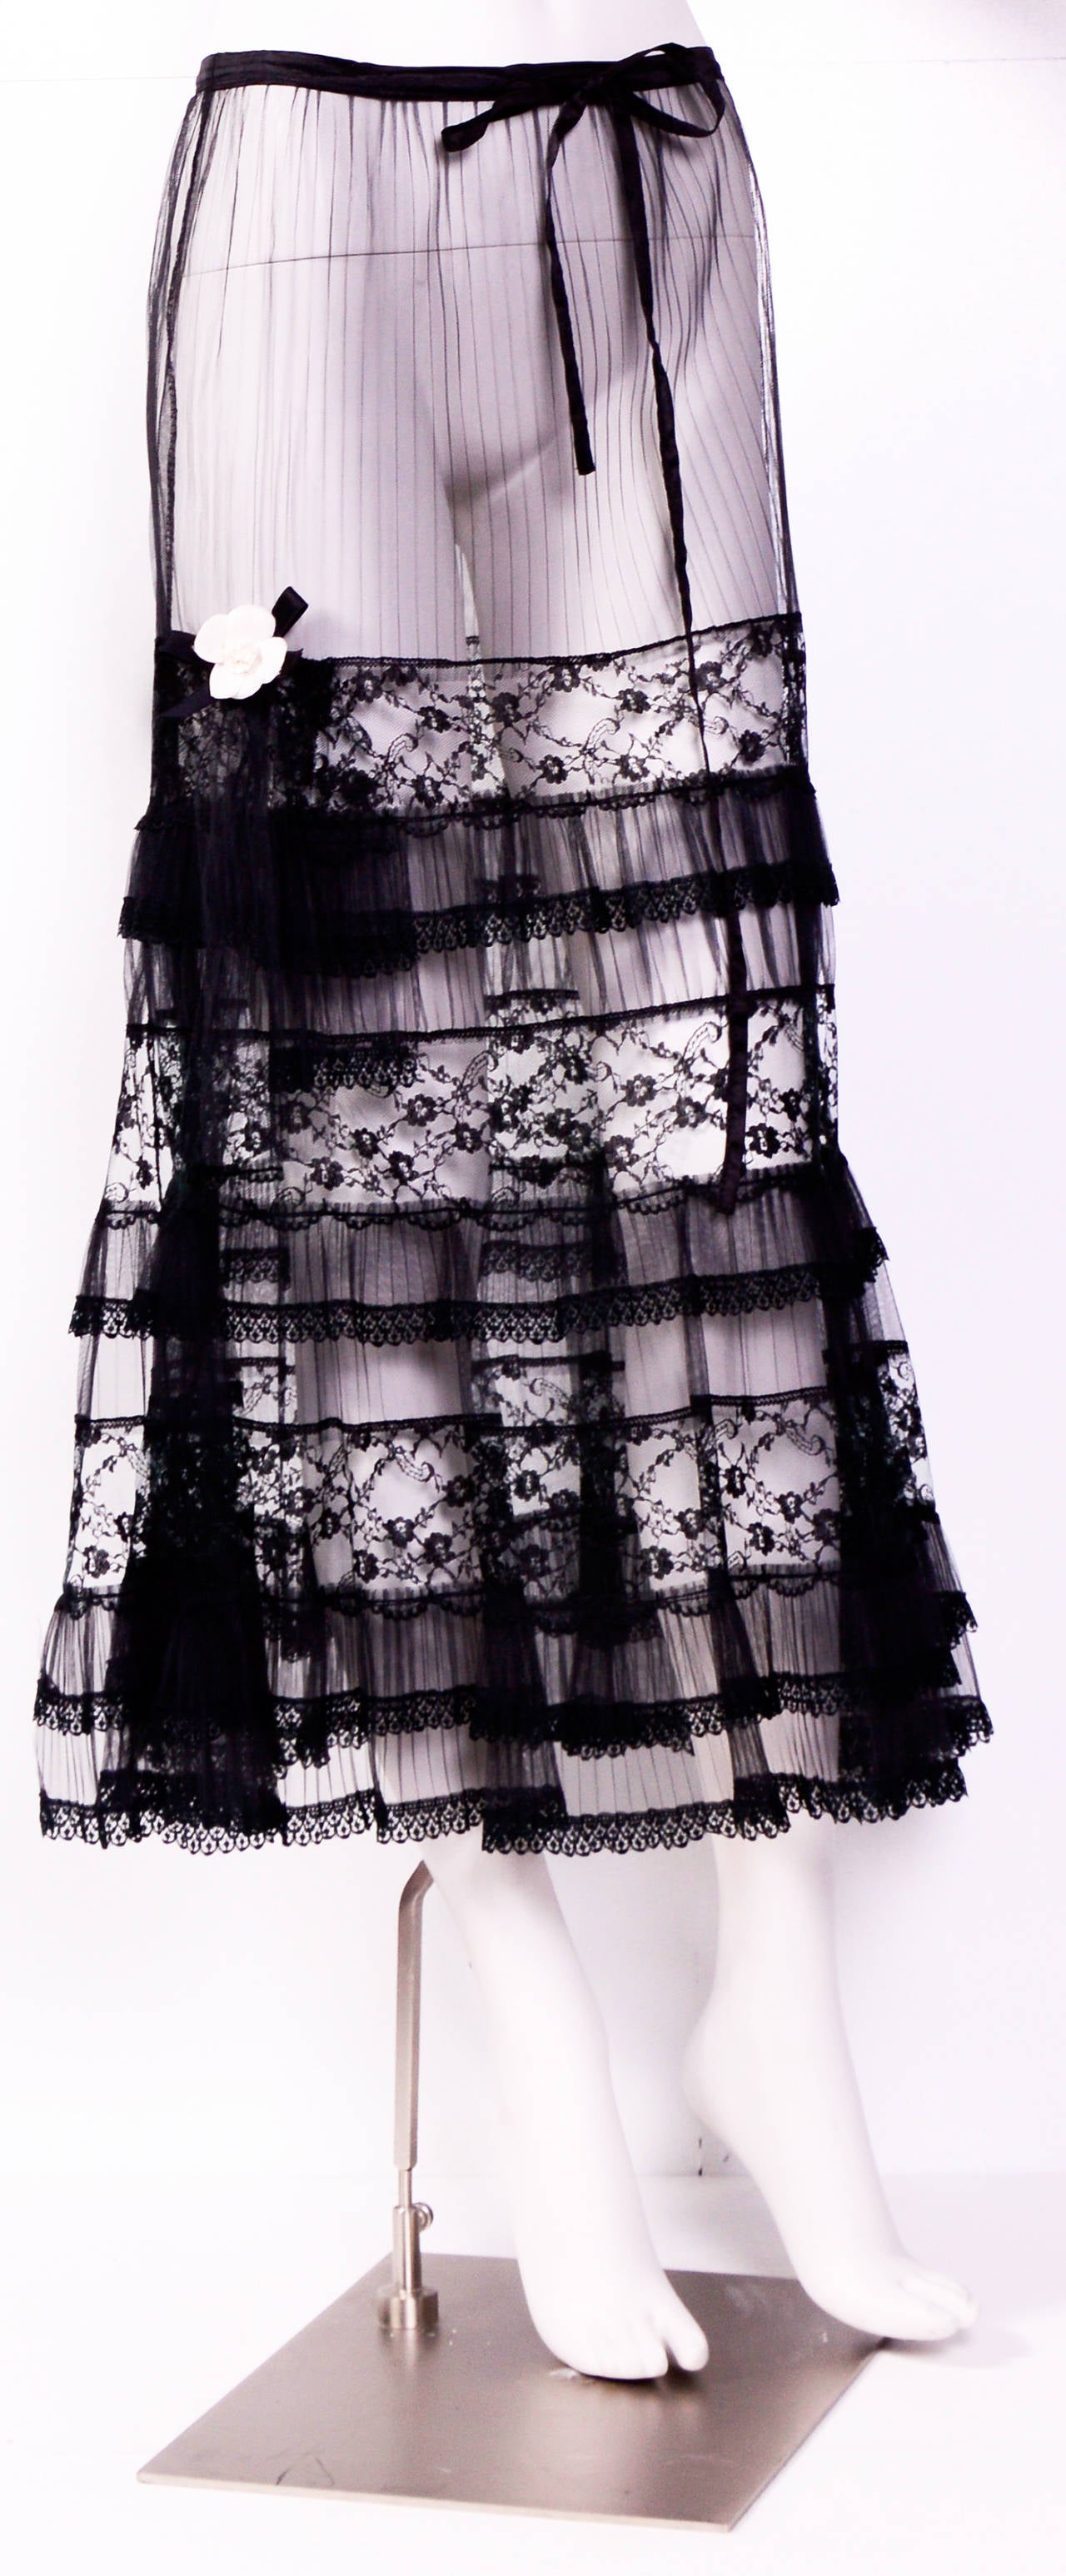 Chanel Camellia Off White Flower Black Ribbon Pin Brooch attached to this adorable Lace & Tulle ruffle skirt. 
Black tulle mini pleats trimmed with lace, 2 attached lace and tulle panels on the side. Silk ribbon drawstring at the waist but no